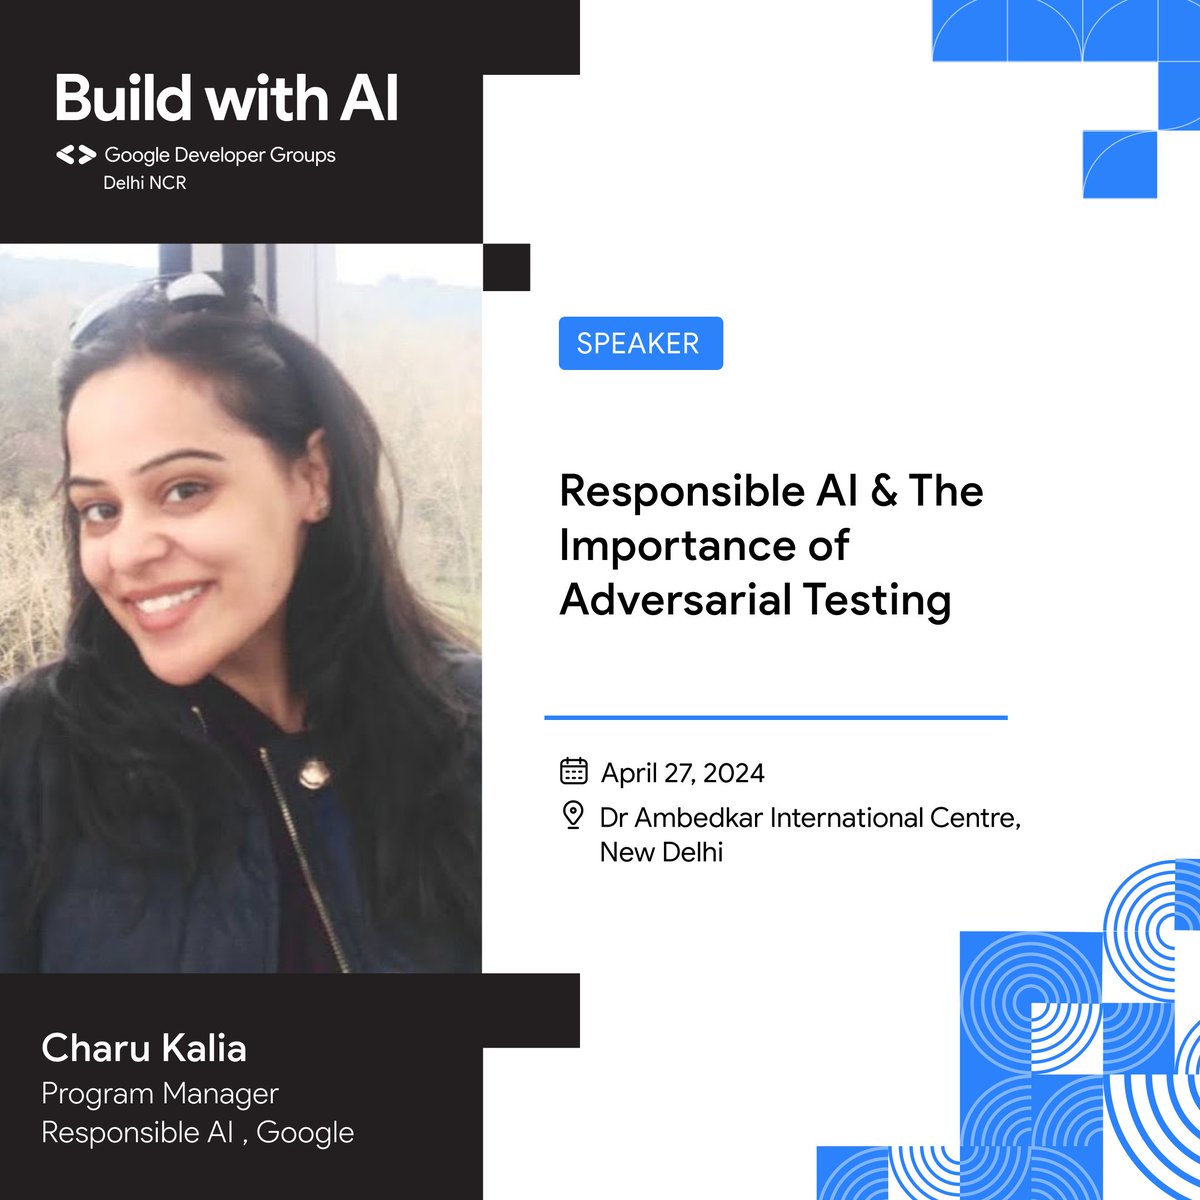 AI builders, listen up! 👂 Charu's teaching Responsible AI - adversarial testing, ethics & more. Develop this world-changing tech the right way.